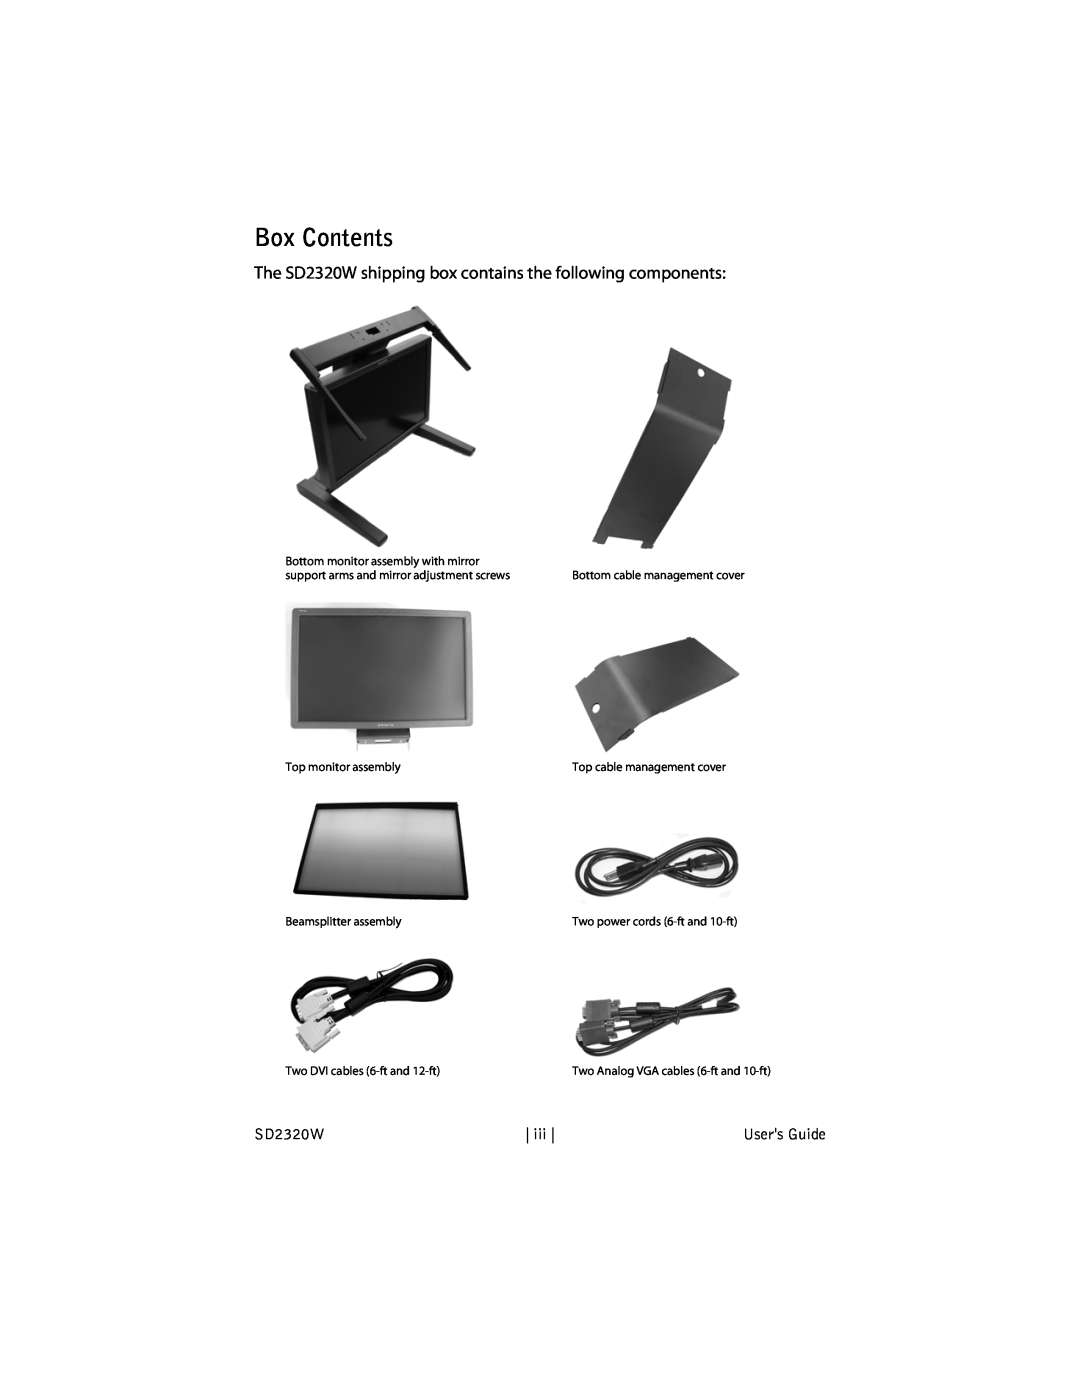 Planar SD2320W Box Contents, Users Guide, Bottom monitor assembly with mirror, support arms and mirror adjustment screws 